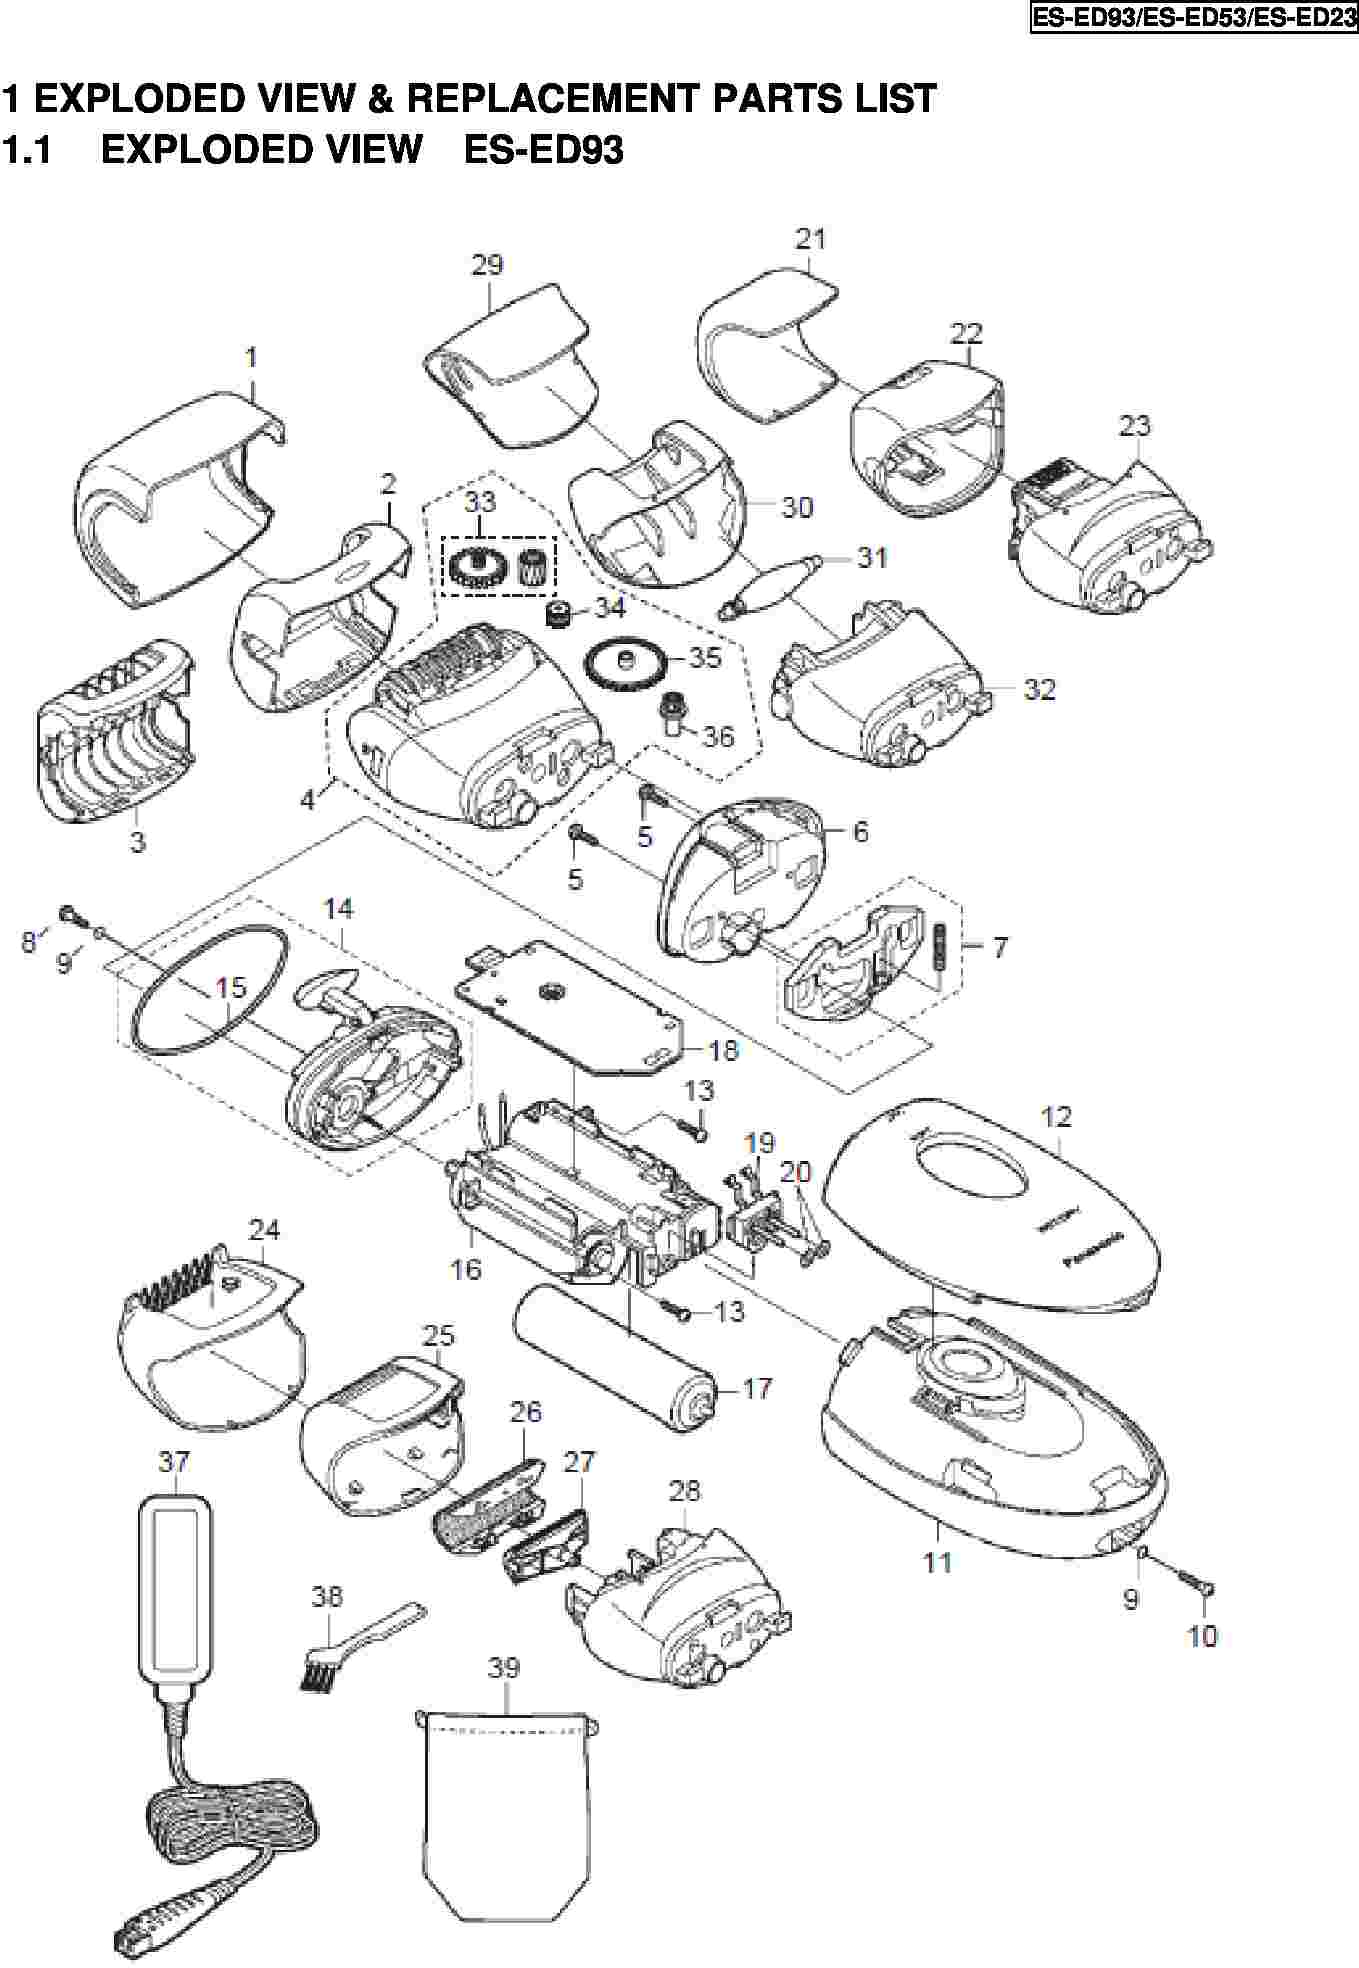 ES-ED93: Exploded View